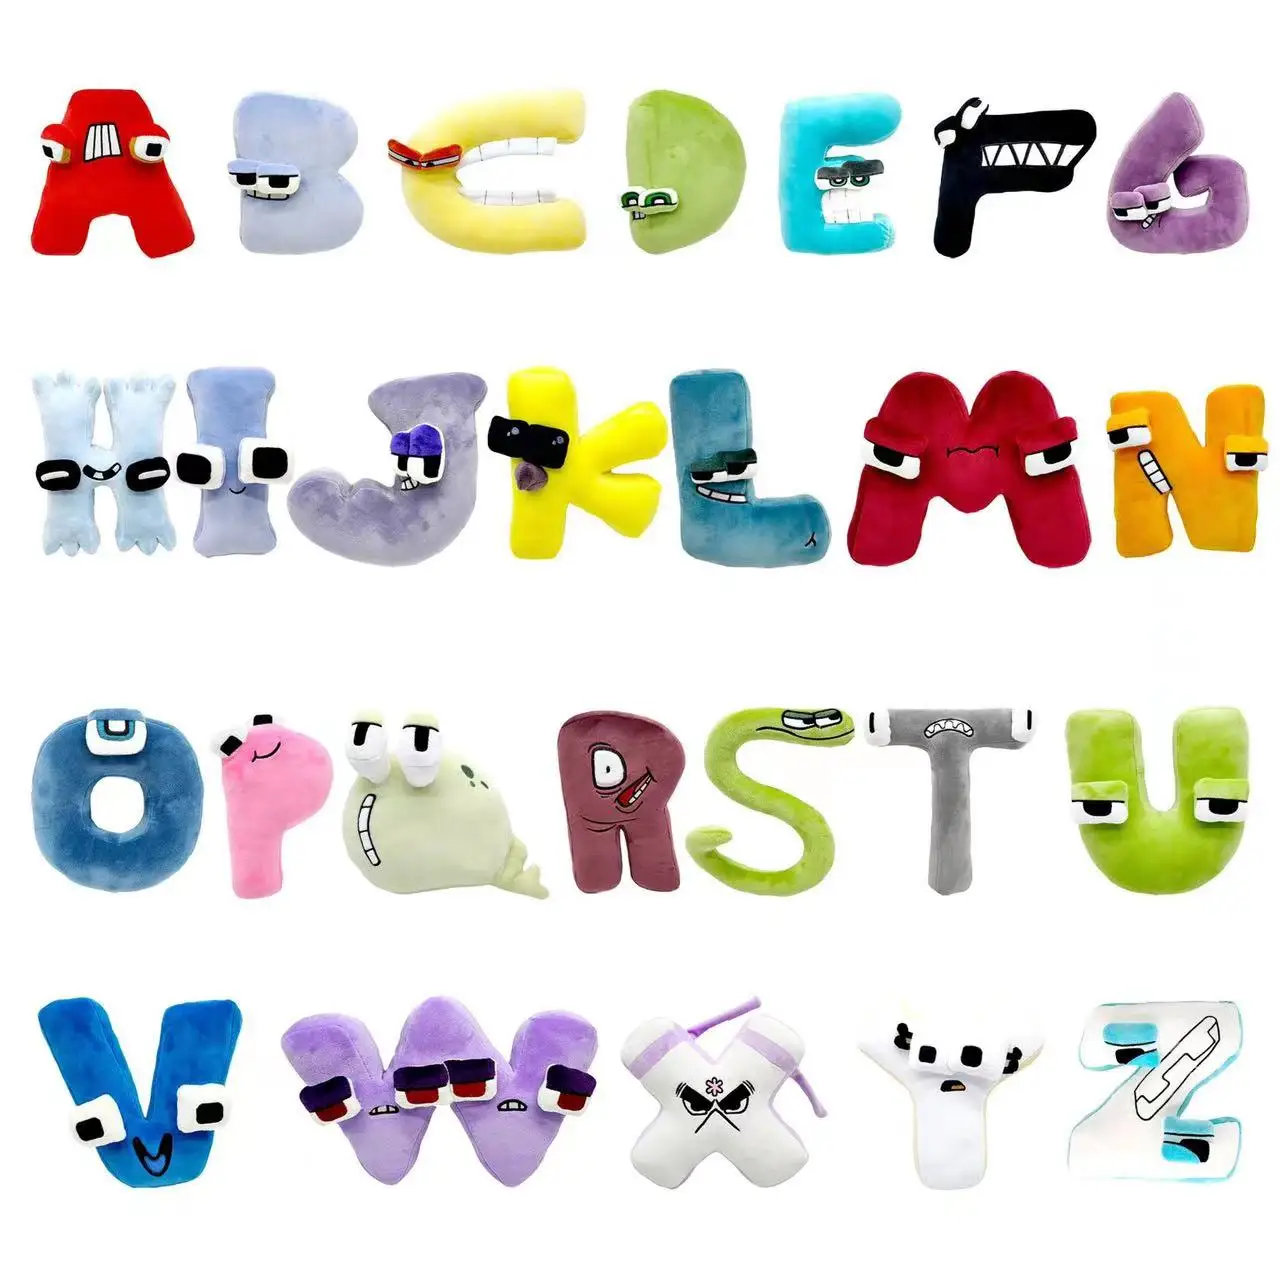 

20CM NEW Alphabet Lore Plush Toy Character Doll Kawaii Stuffed Animal Toys for Children Christmas Children's Toys Gifts